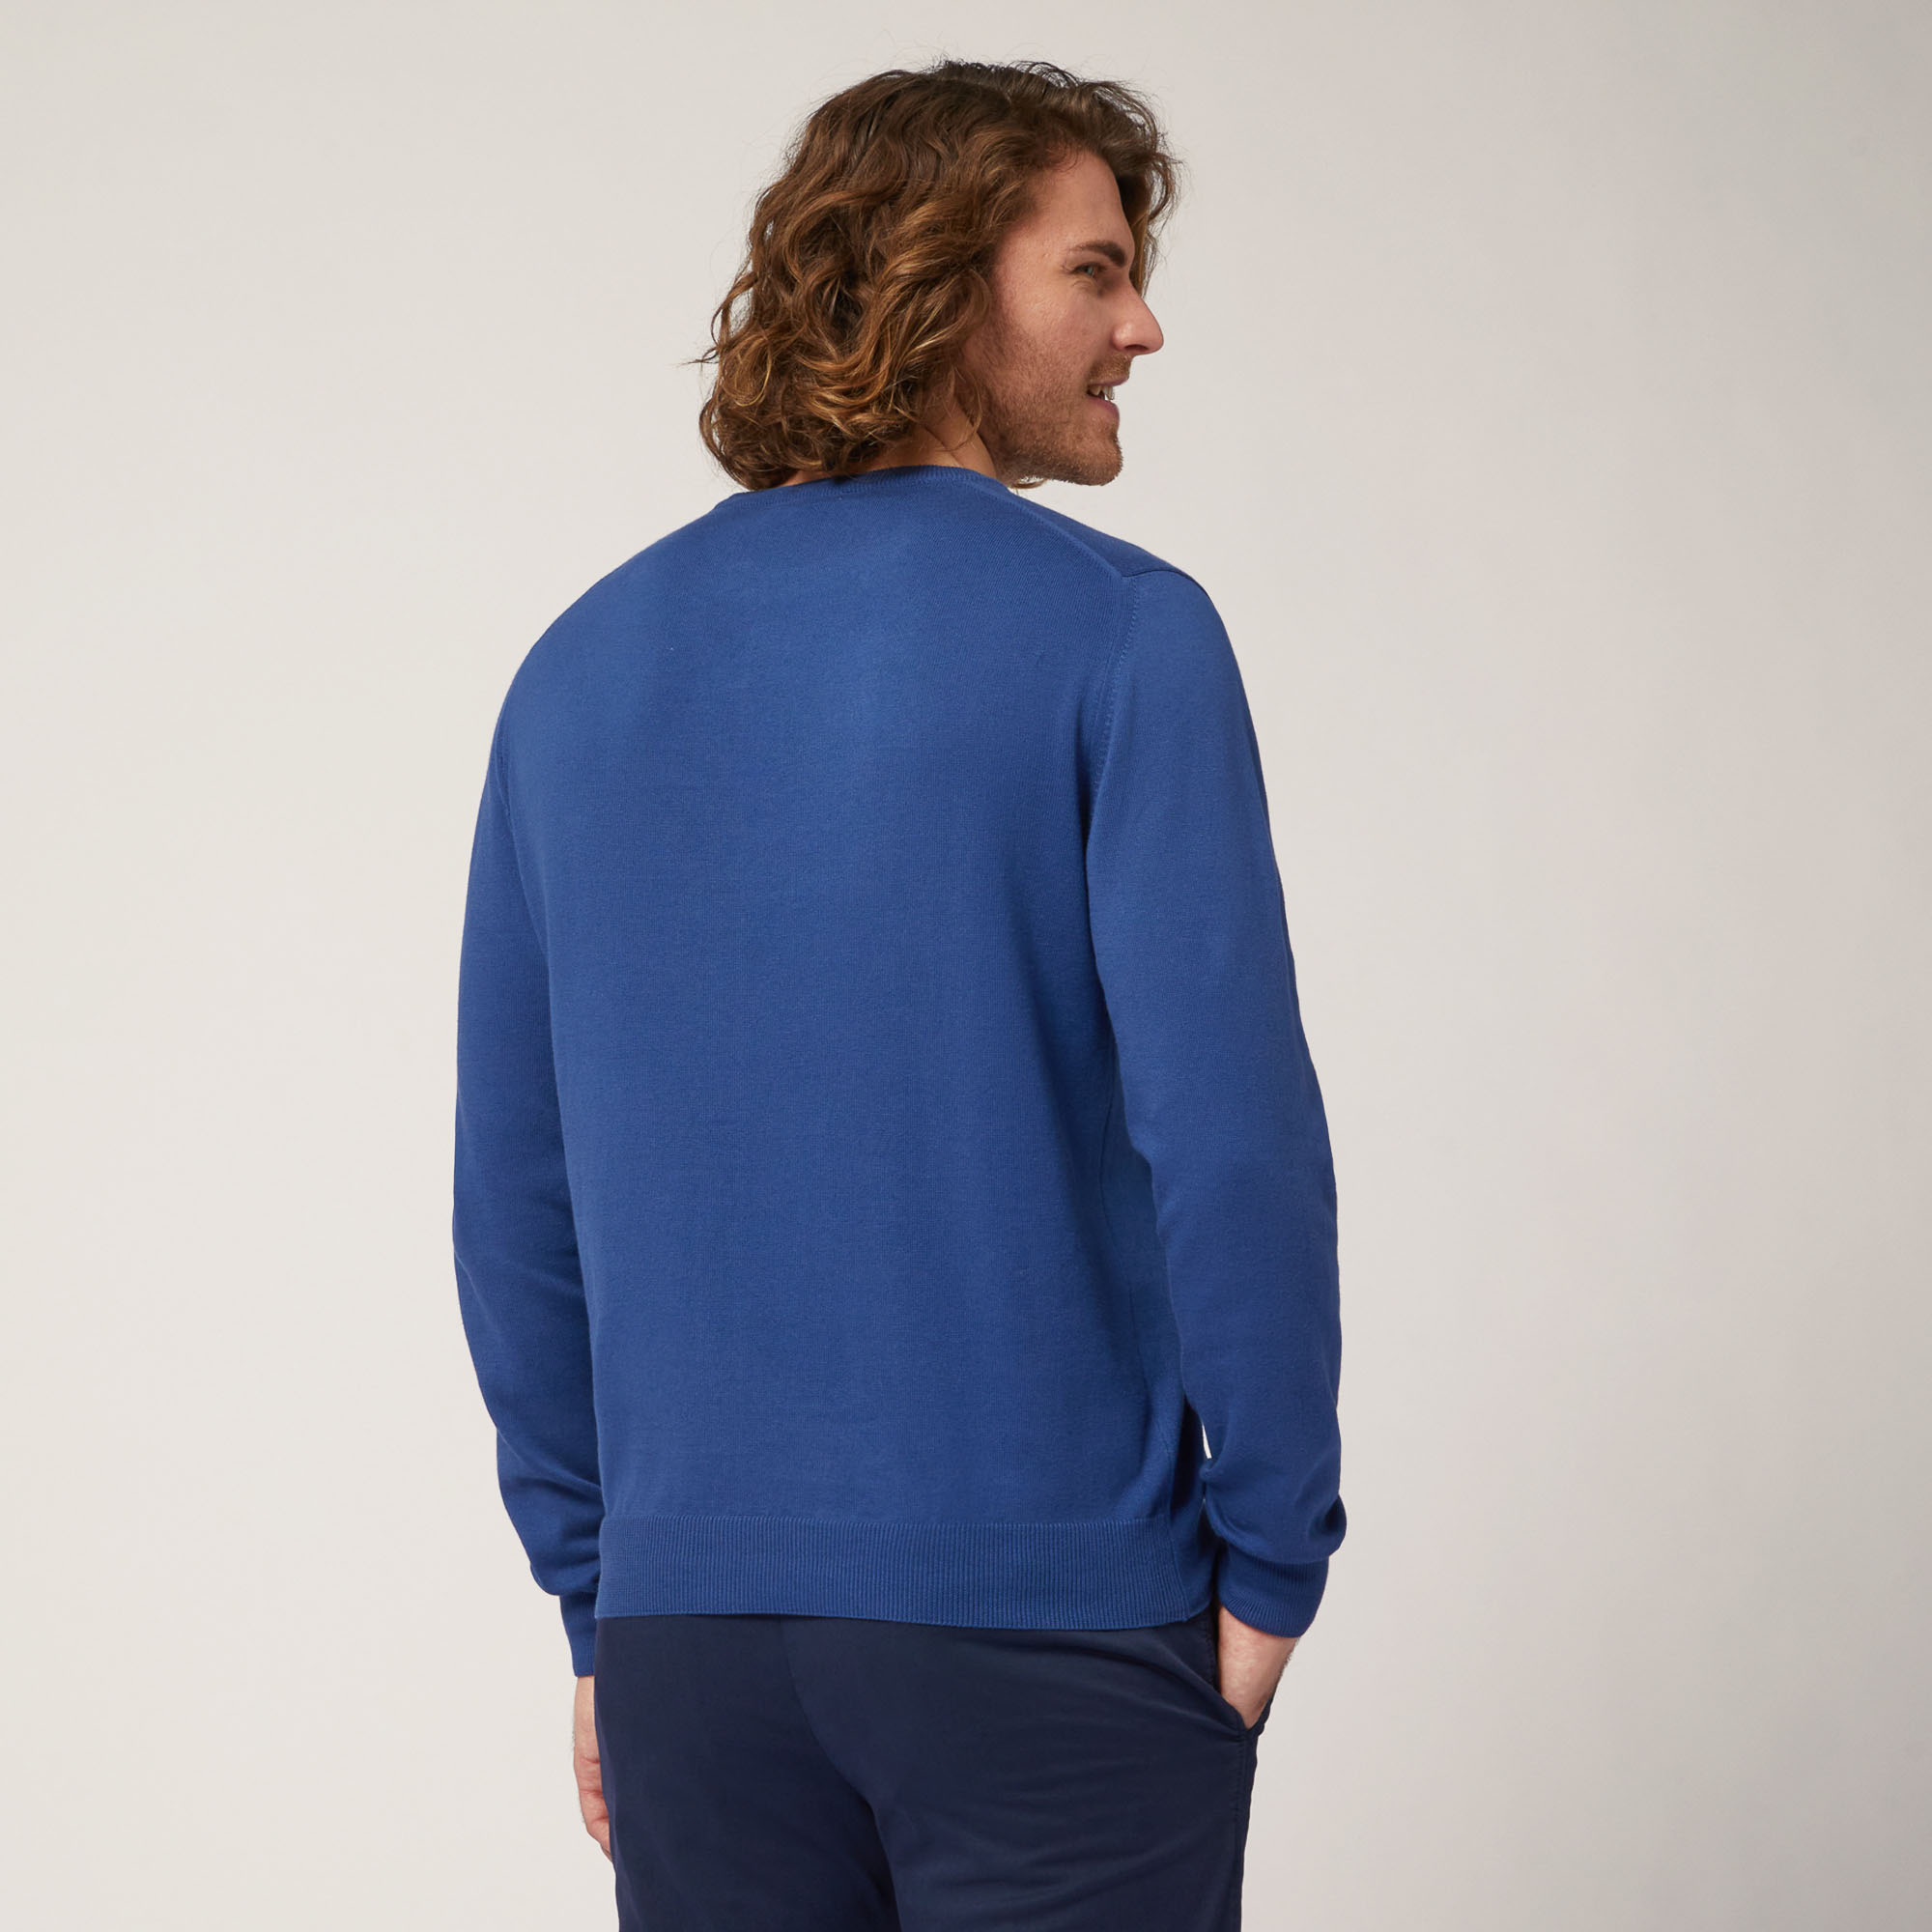 Pullover Girocollo In Cotone, Blu, large image number 1